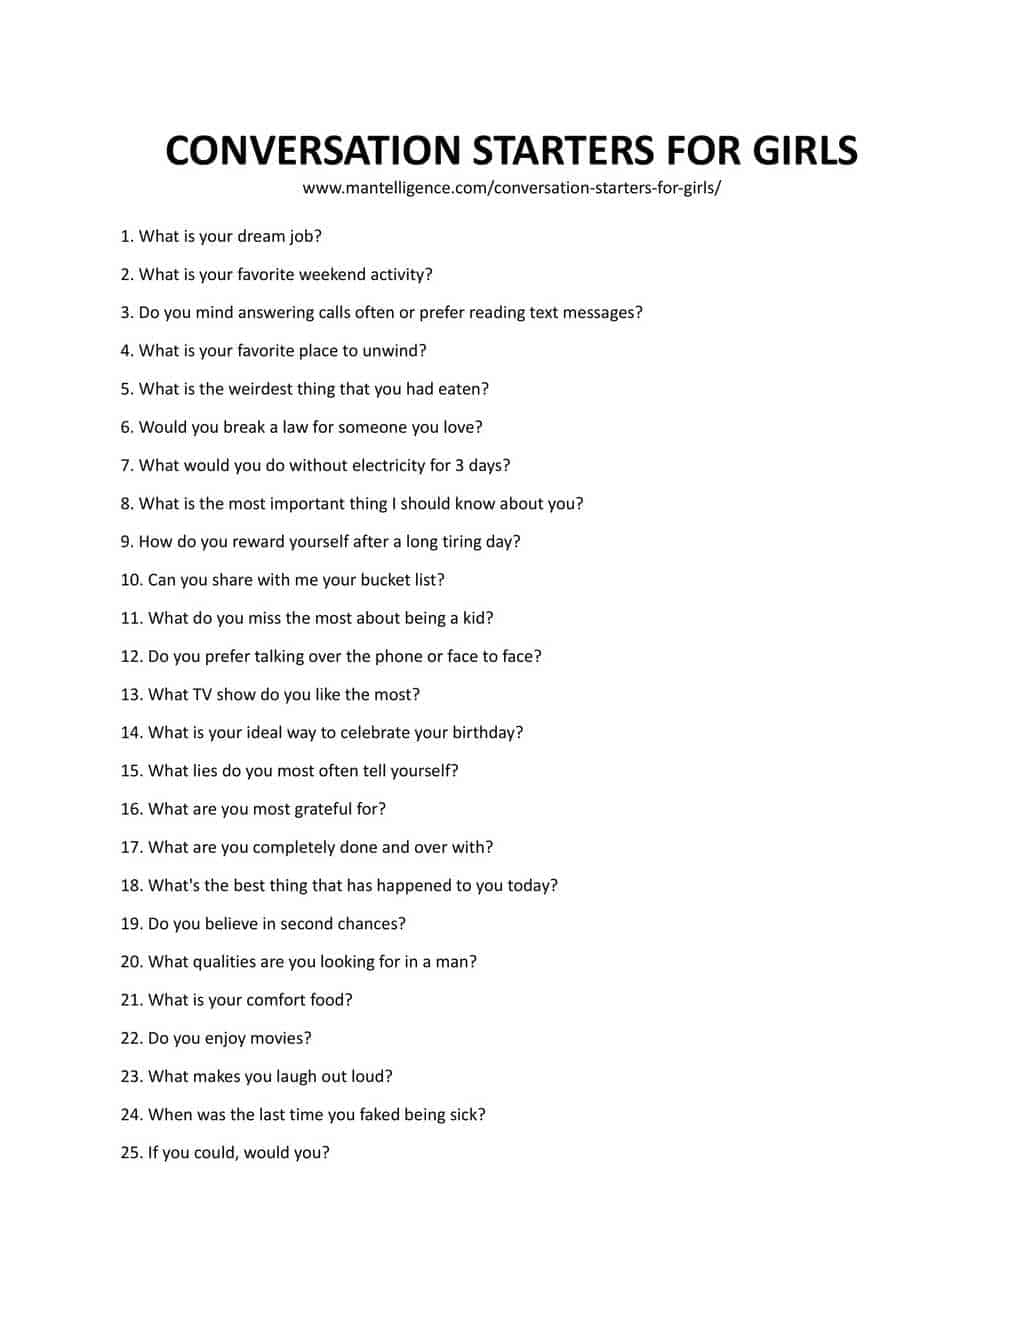 deep conversation starters for texting